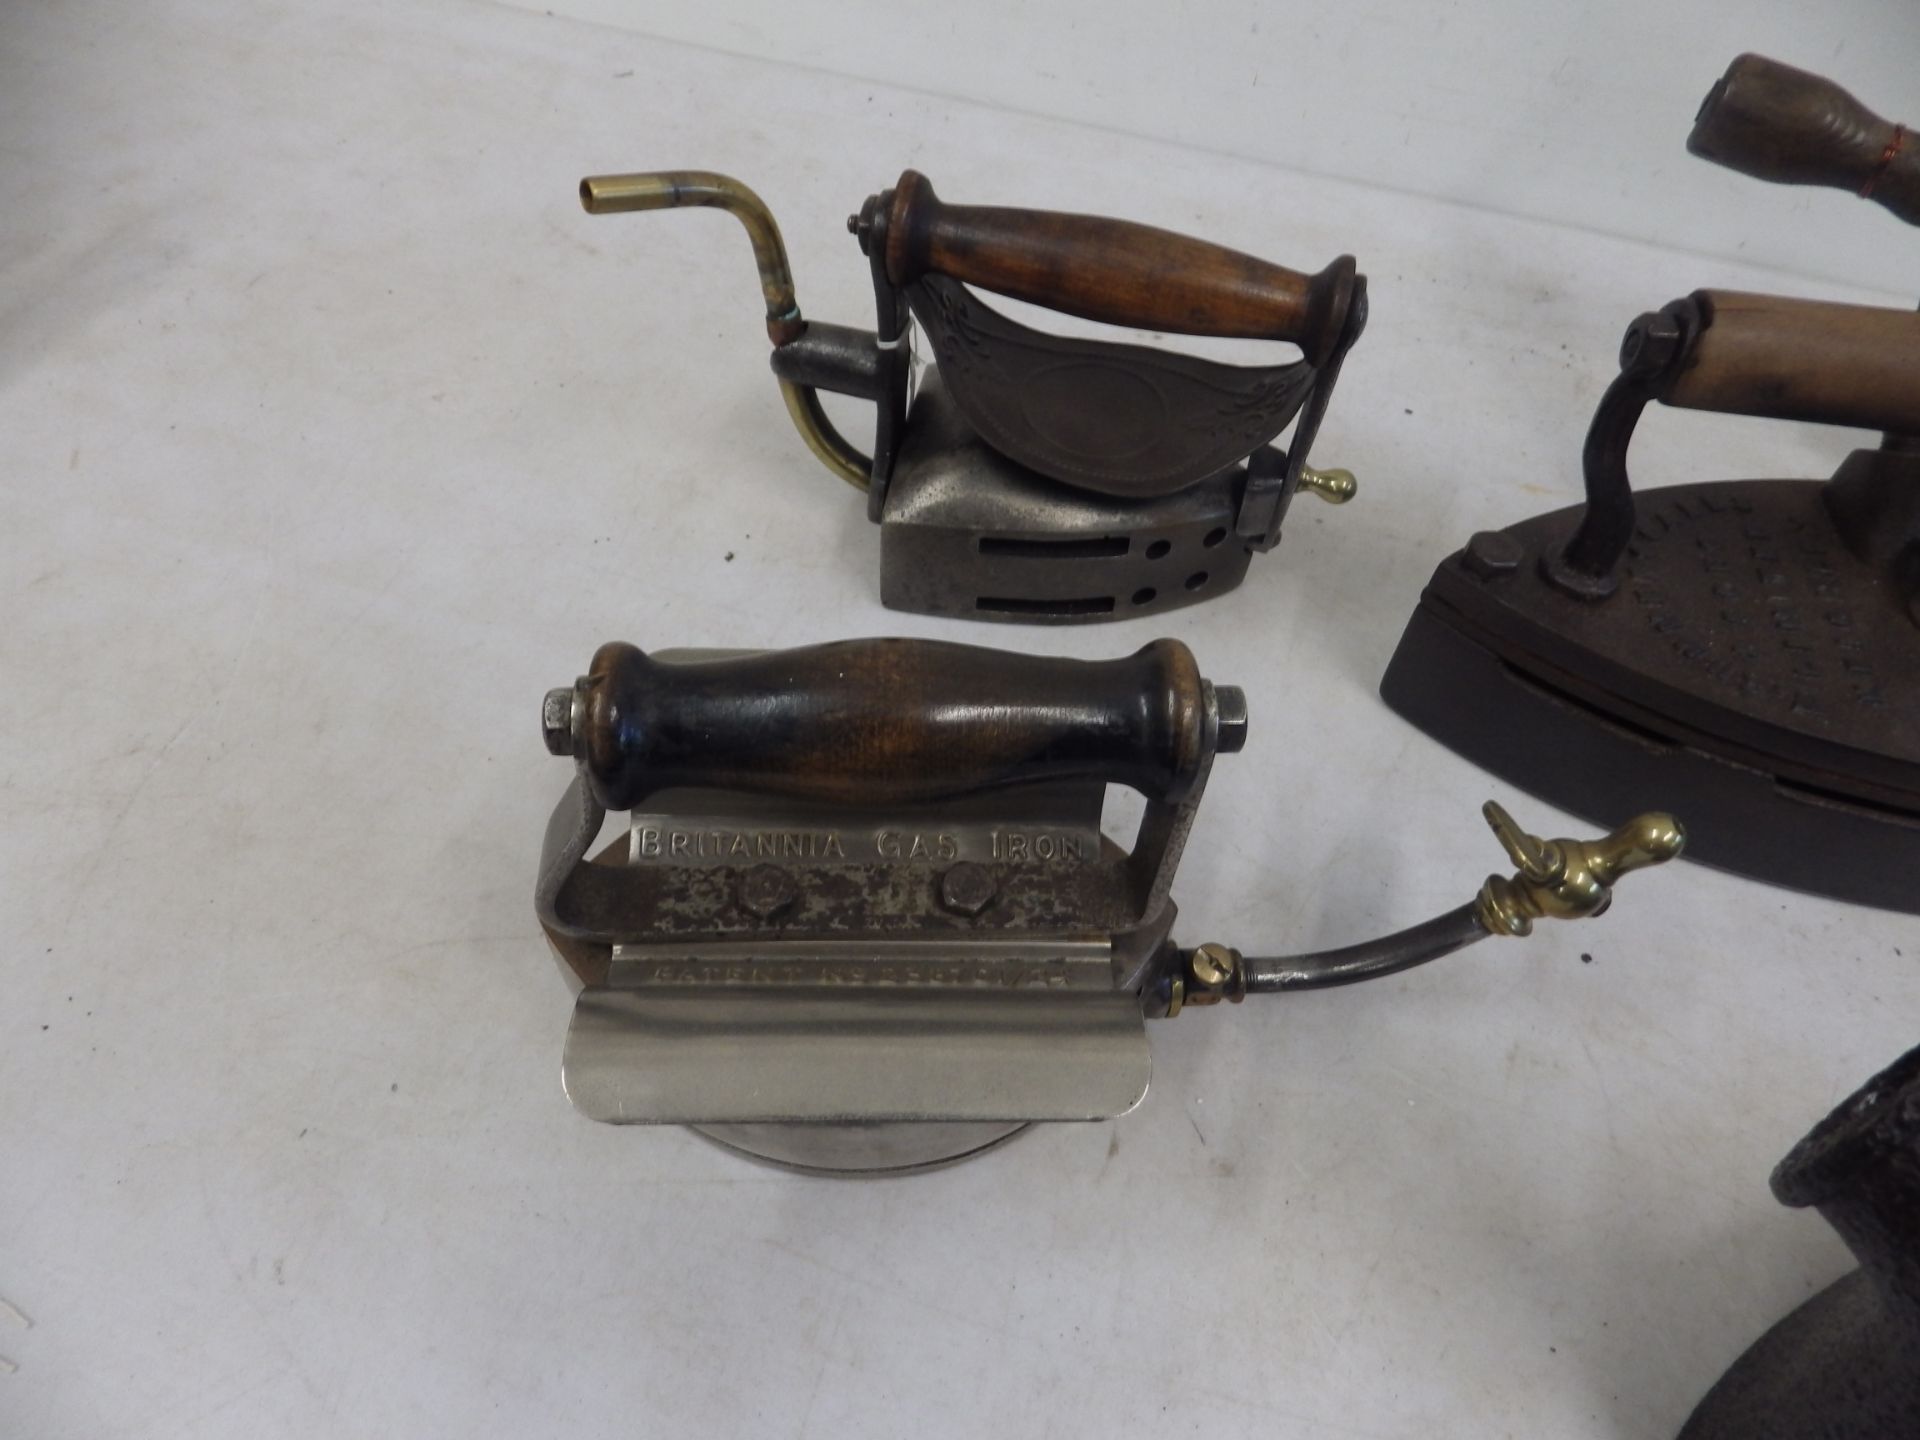 8 assorted gas irons to incl 2 x turn over gas irons, Brittania patent 238701/24, Izot? patent - Image 2 of 5